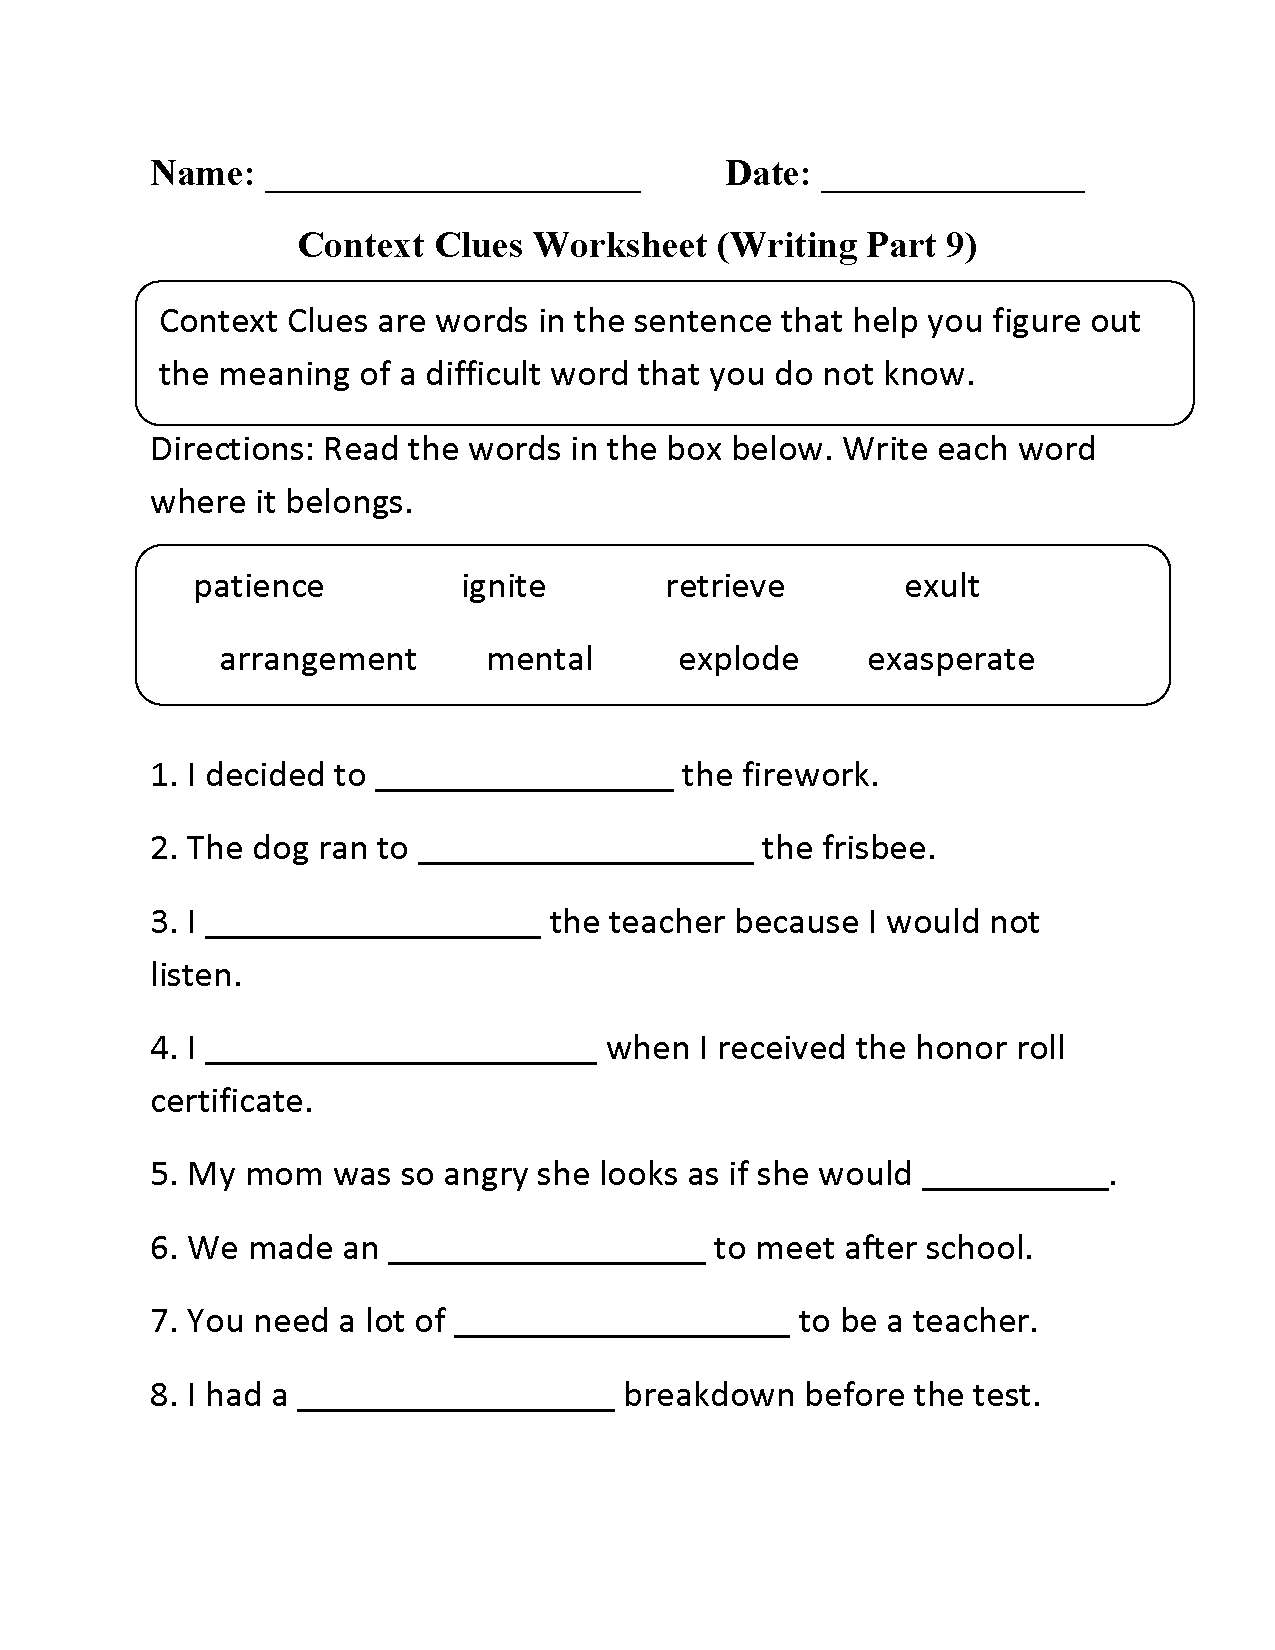 context-clues-worksheet-1-4-answers